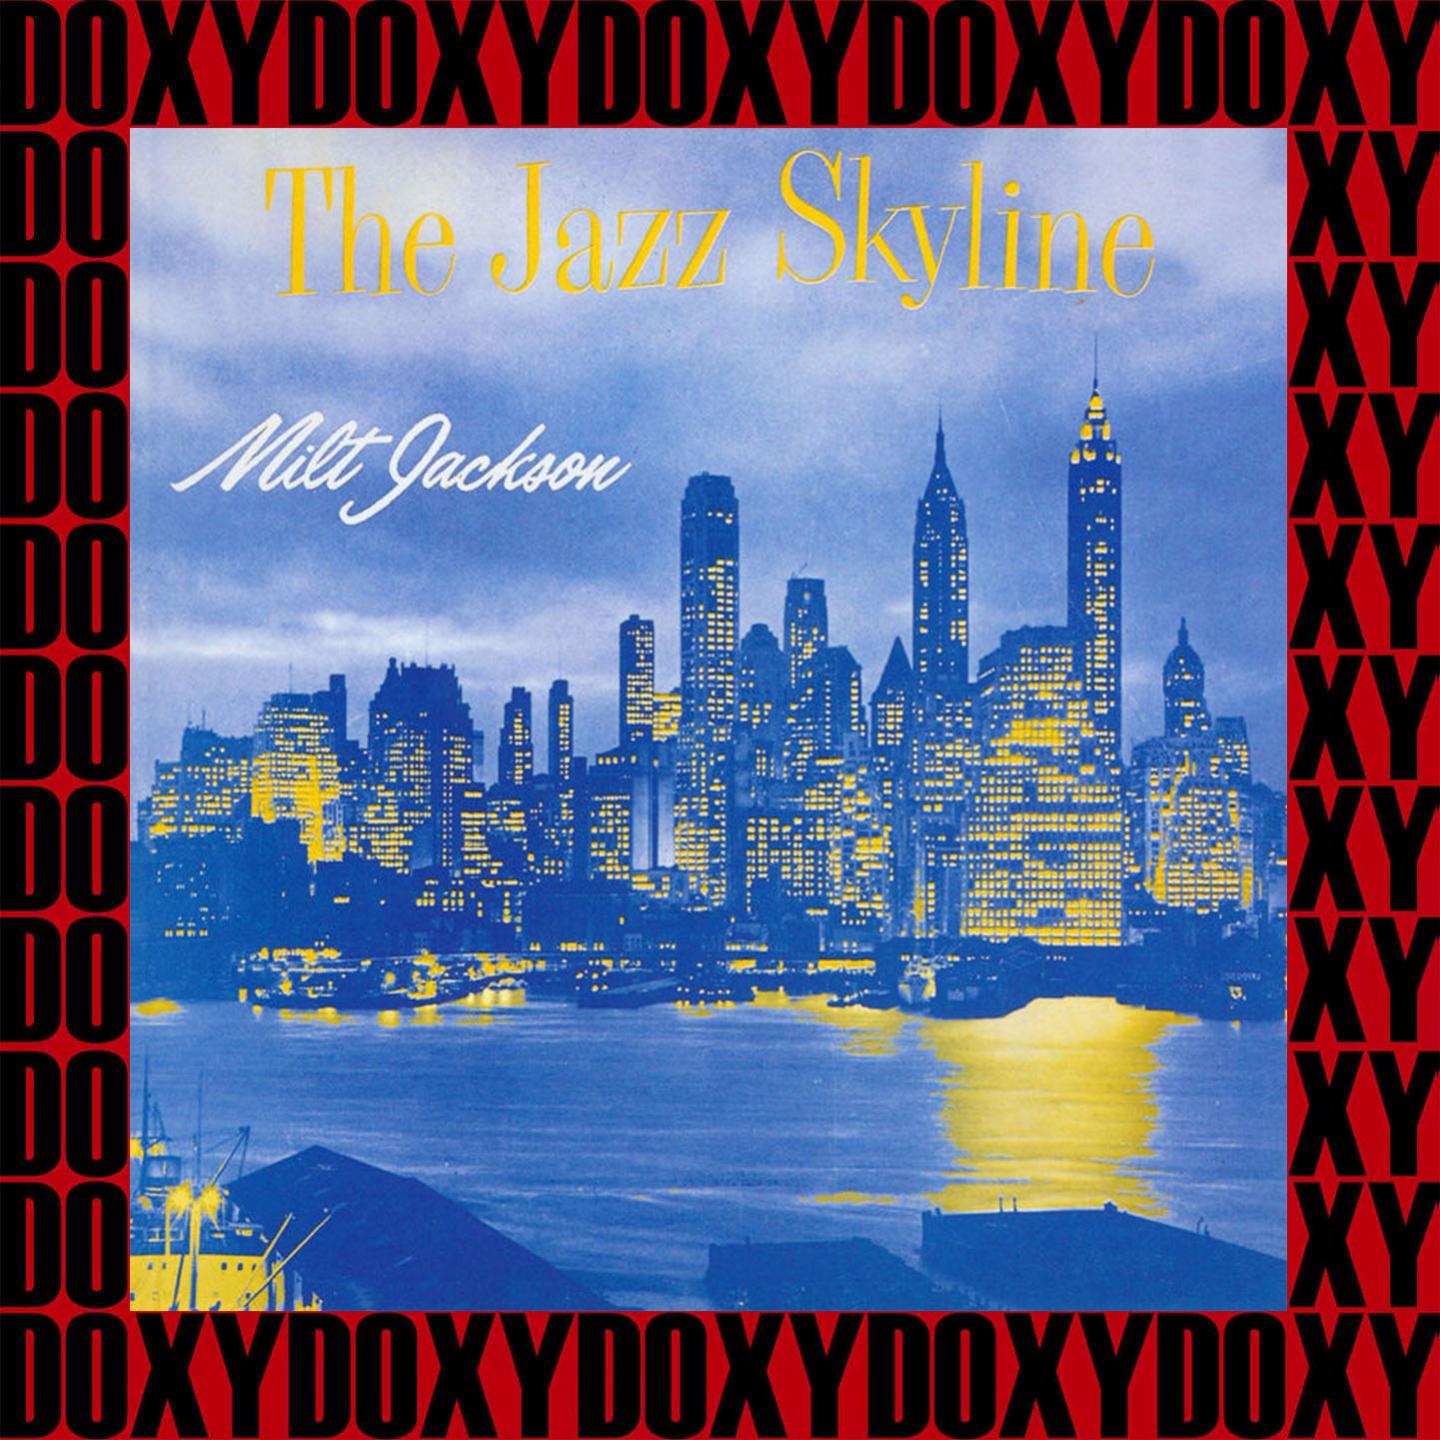 The Jazz Skyline (Remastered Version) (Doxy Collection)